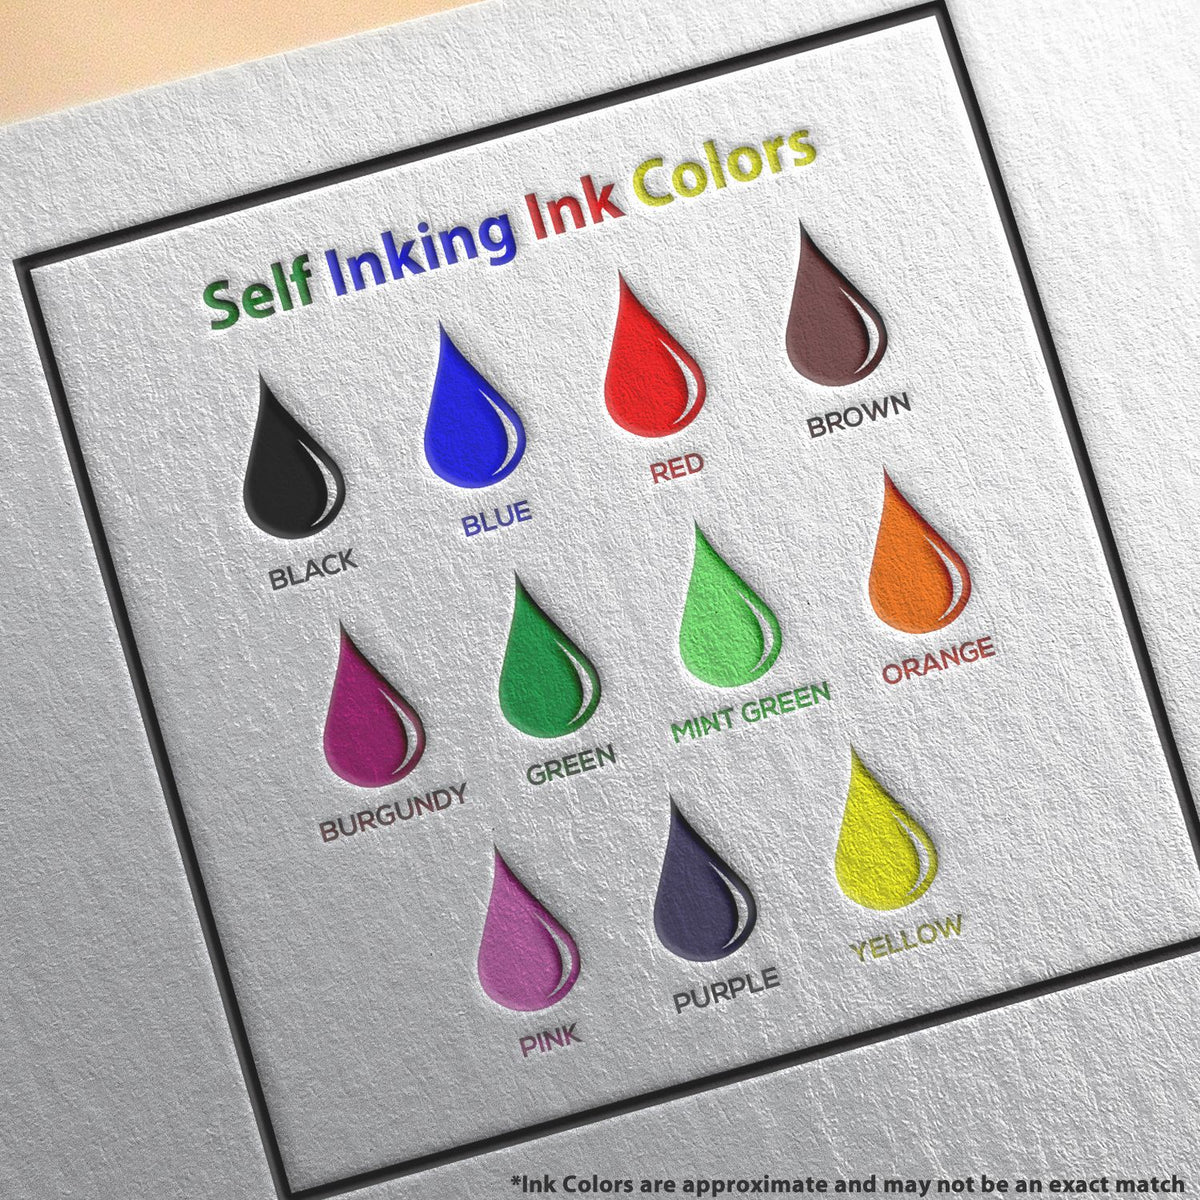 A picture showing the different ink colors or hues available for the Heavy-Duty Delaware Rectangular Notary Stamp product.